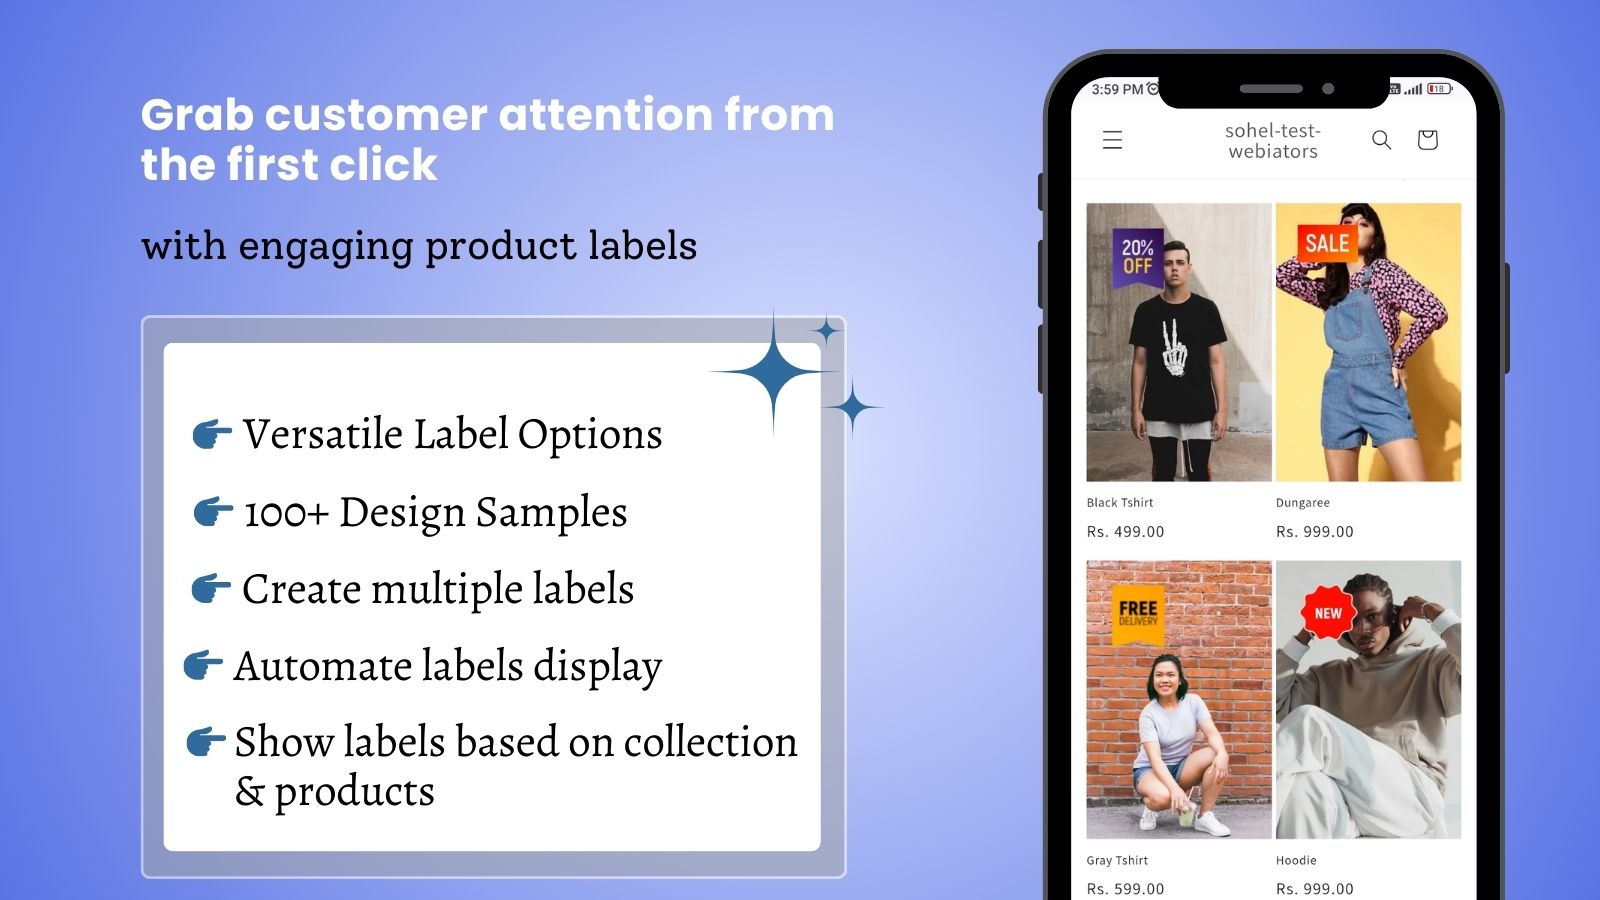 Grab customer attention from the first click